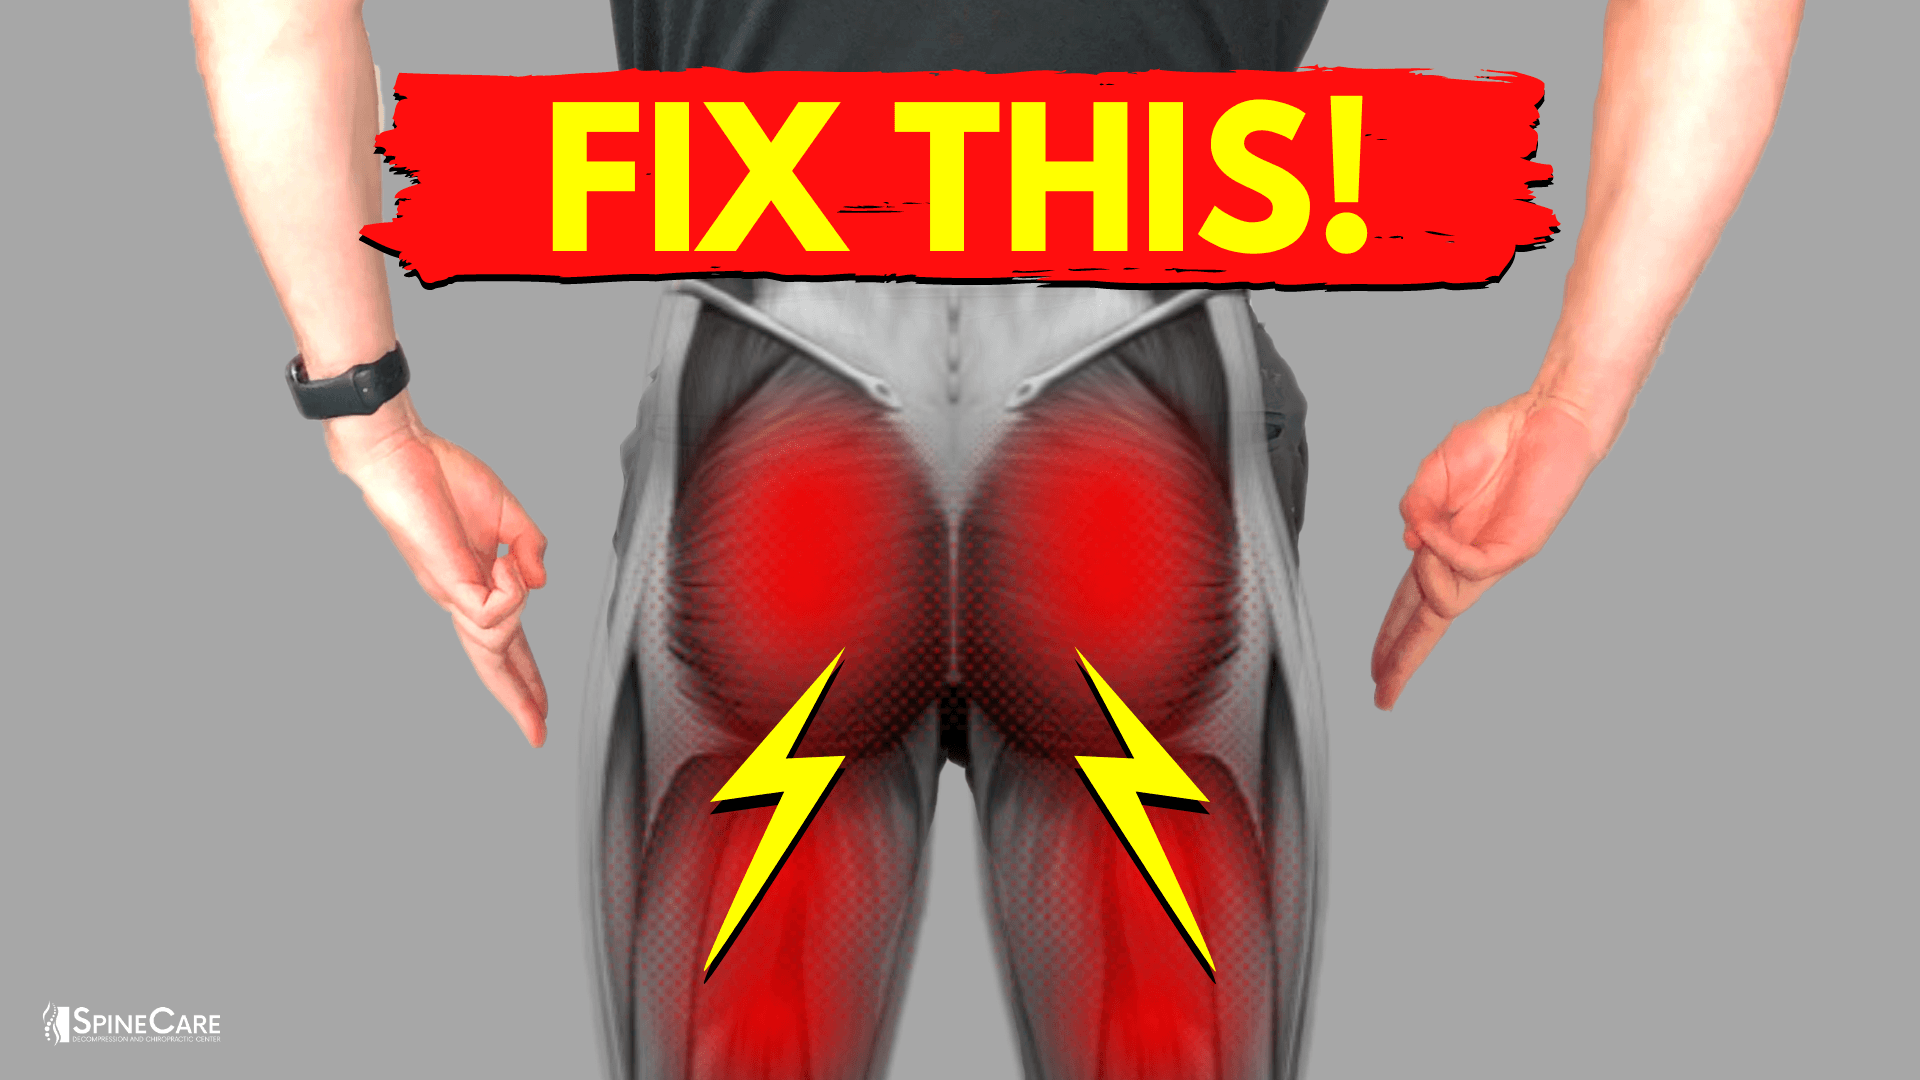 How to Relieve Sciatica Pain in BOTH LEGS | SpineCare | St. Joseph, Michigan Chiropractor